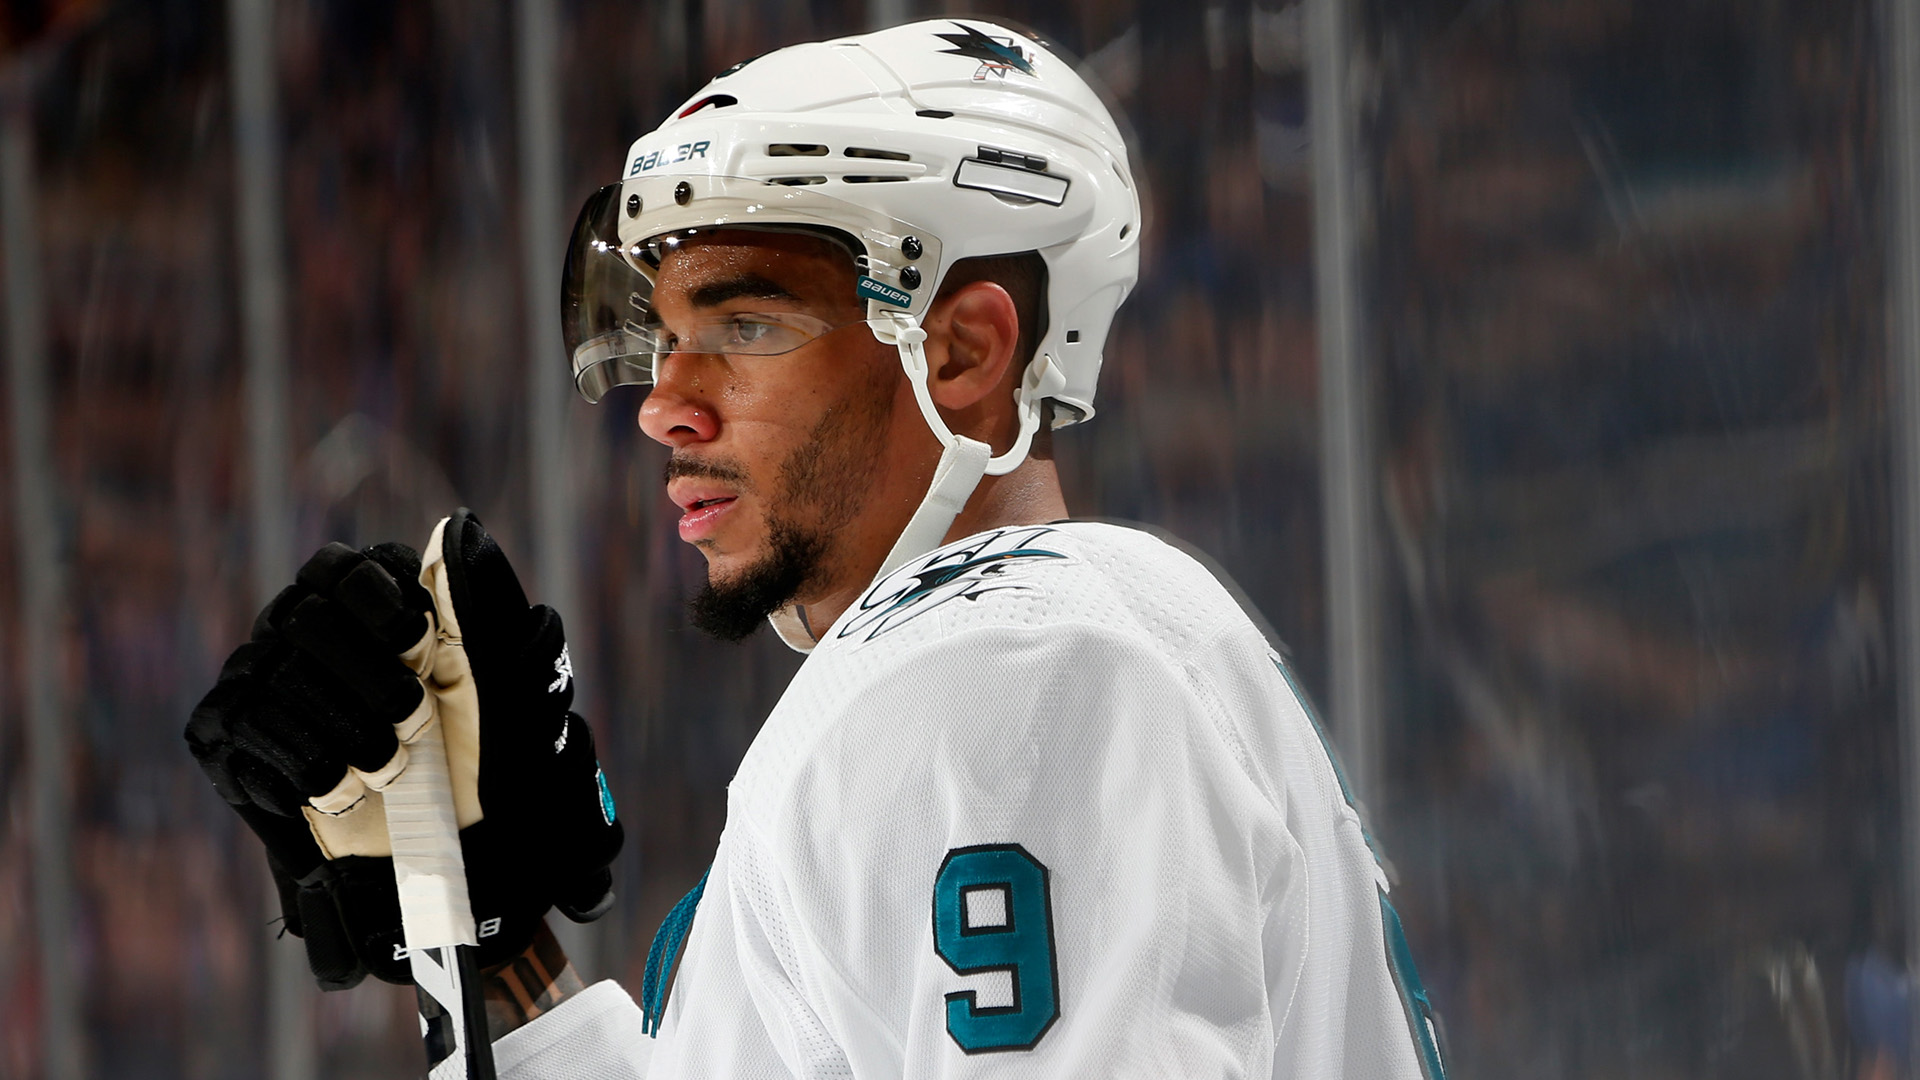 Black hockey players, fans are tired of NHL's expected inaction